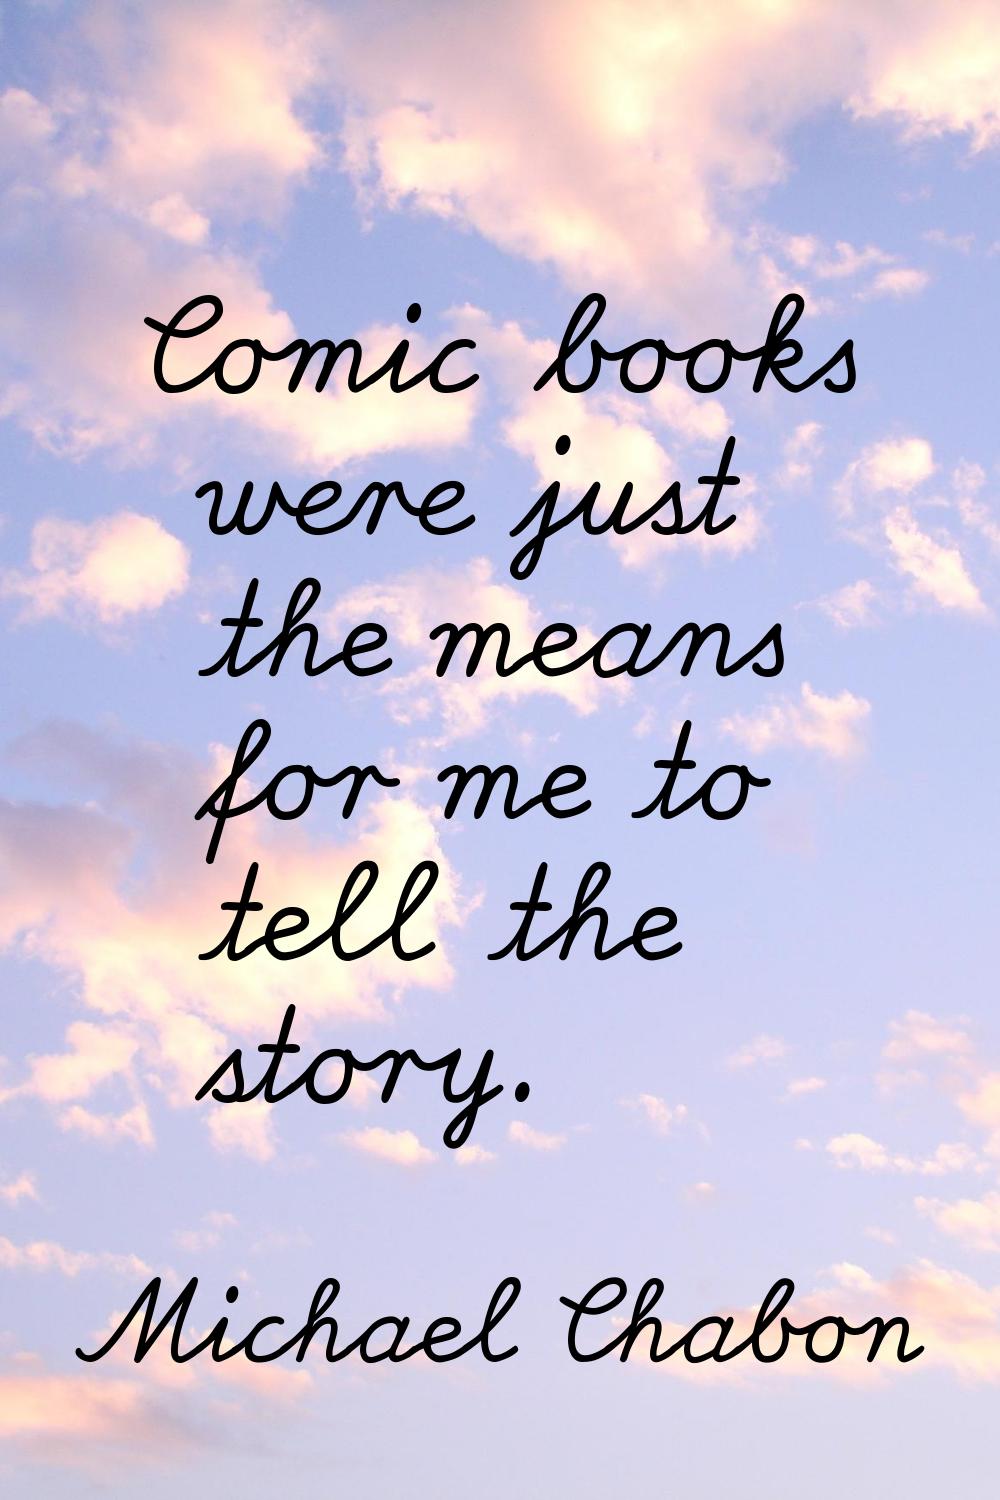 Comic books were just the means for me to tell the story.